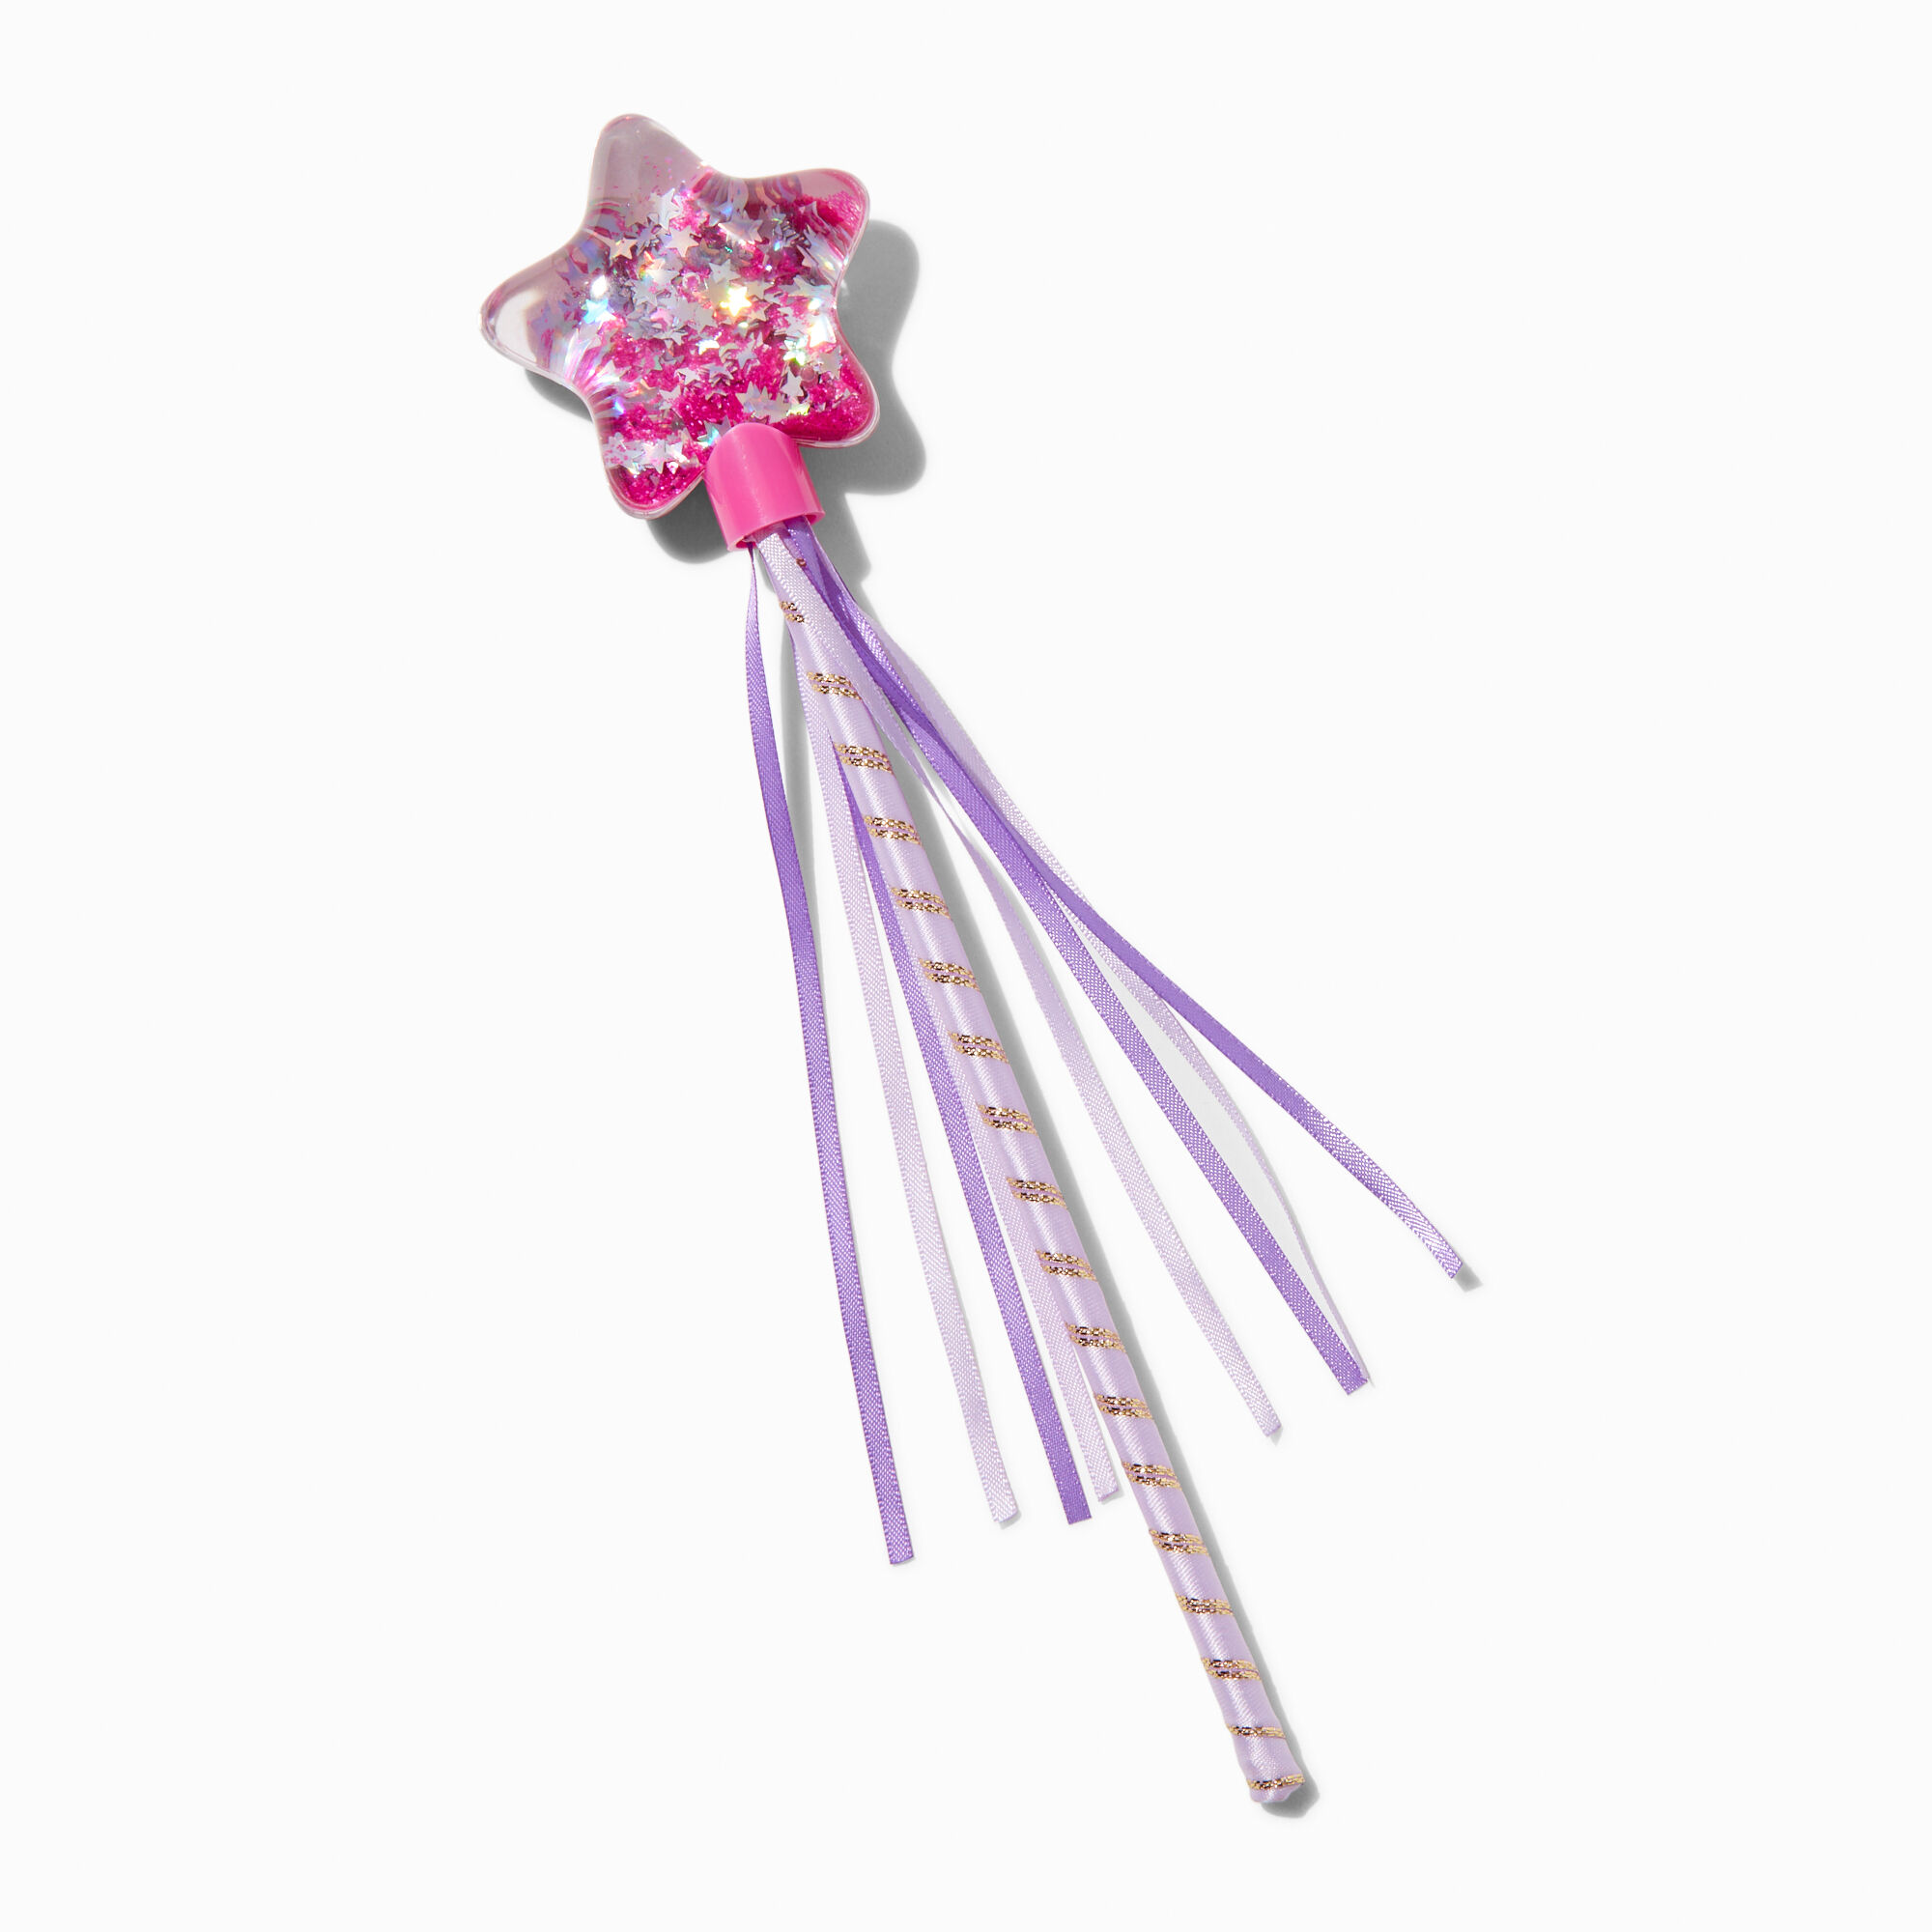 View Claires Club WaterFilled Star Wand Pink information